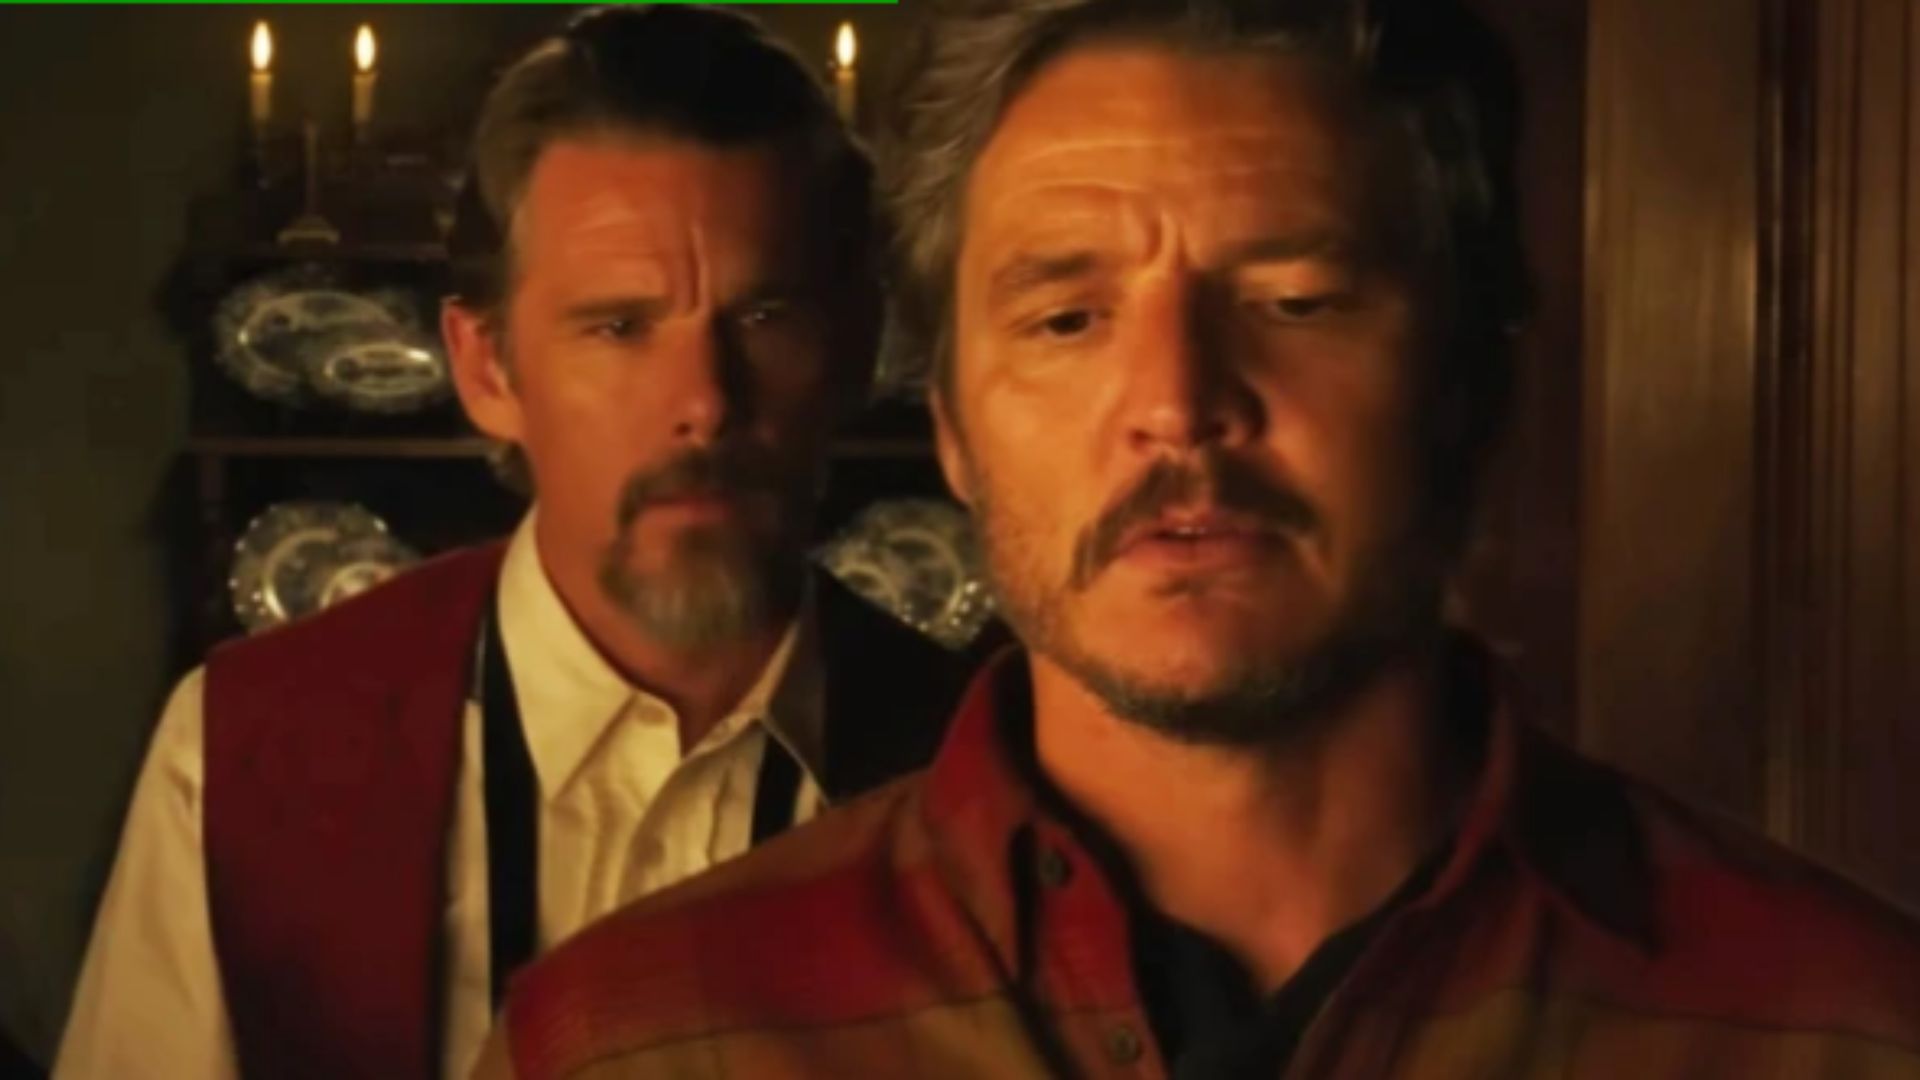 Pedro Pascal and Ethan Hawke play sweethearts in cowboy show